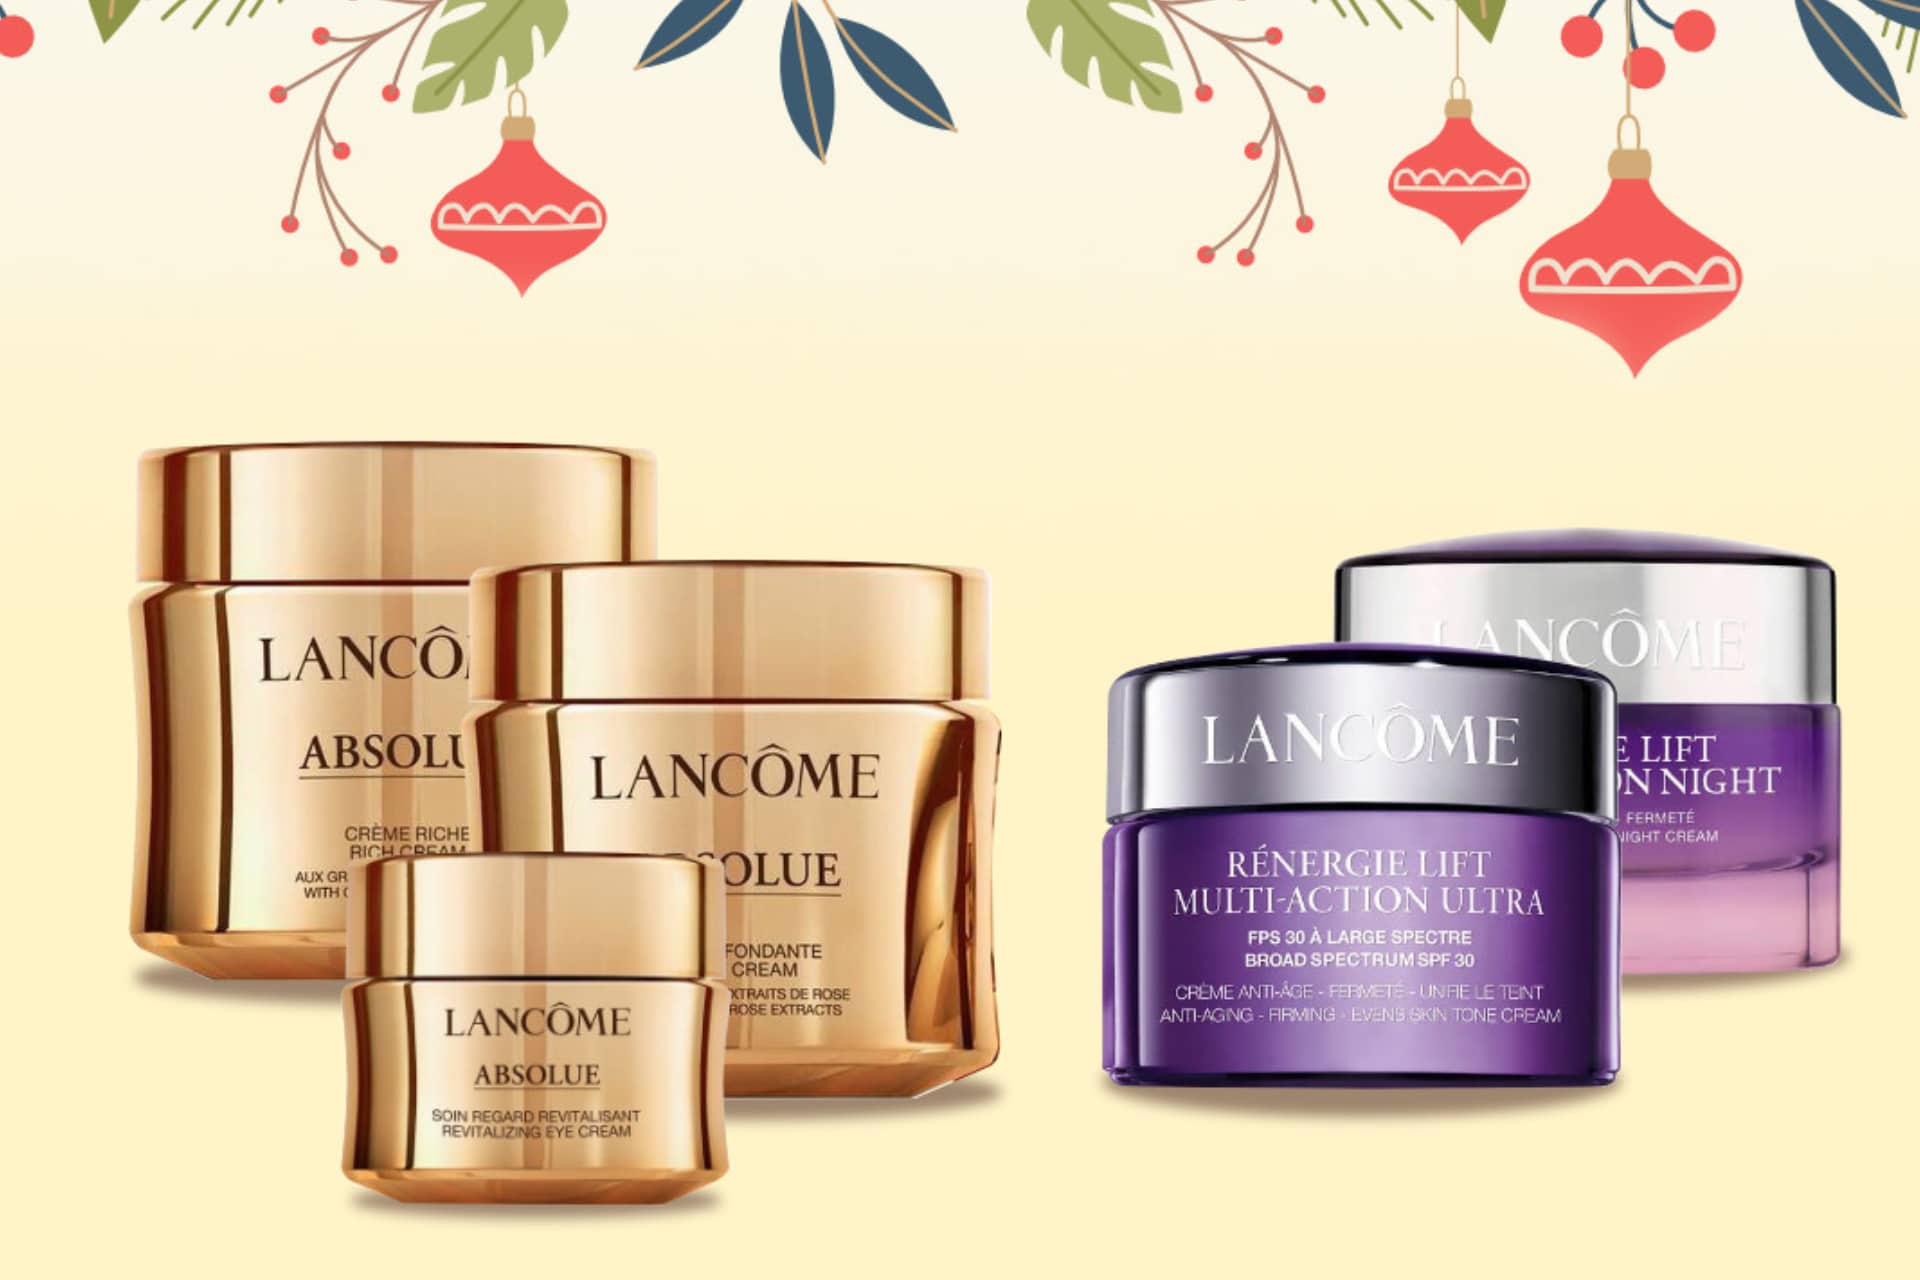 INSERT Holiday Gift Guide and Giveaway Lancome